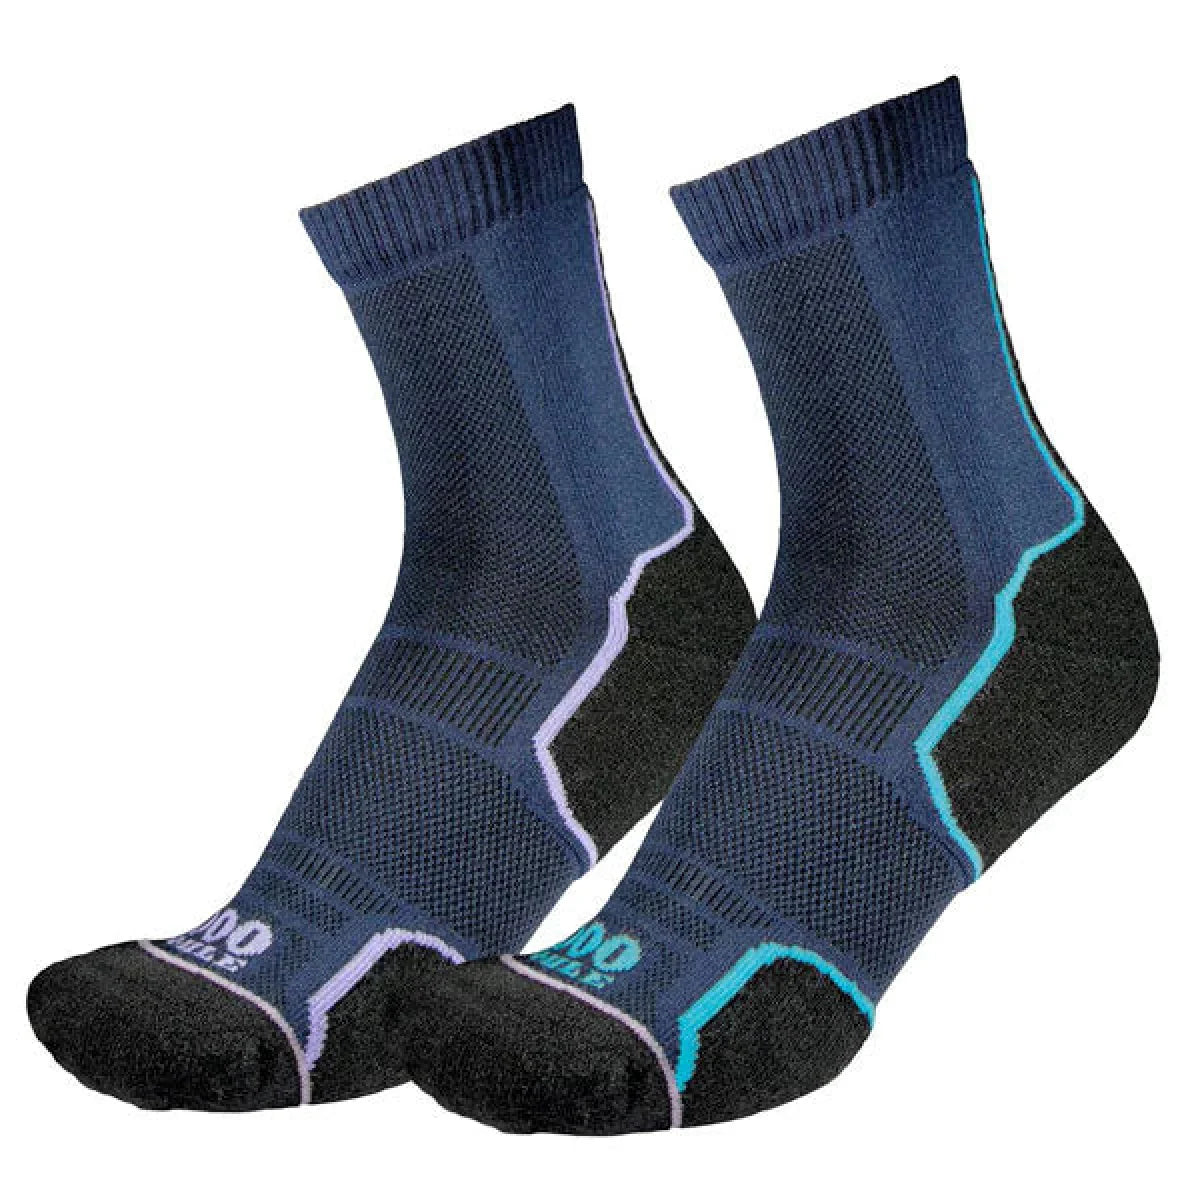 Women's 1000 Mile Trail Repreve Single Layer Sock Twin Pack